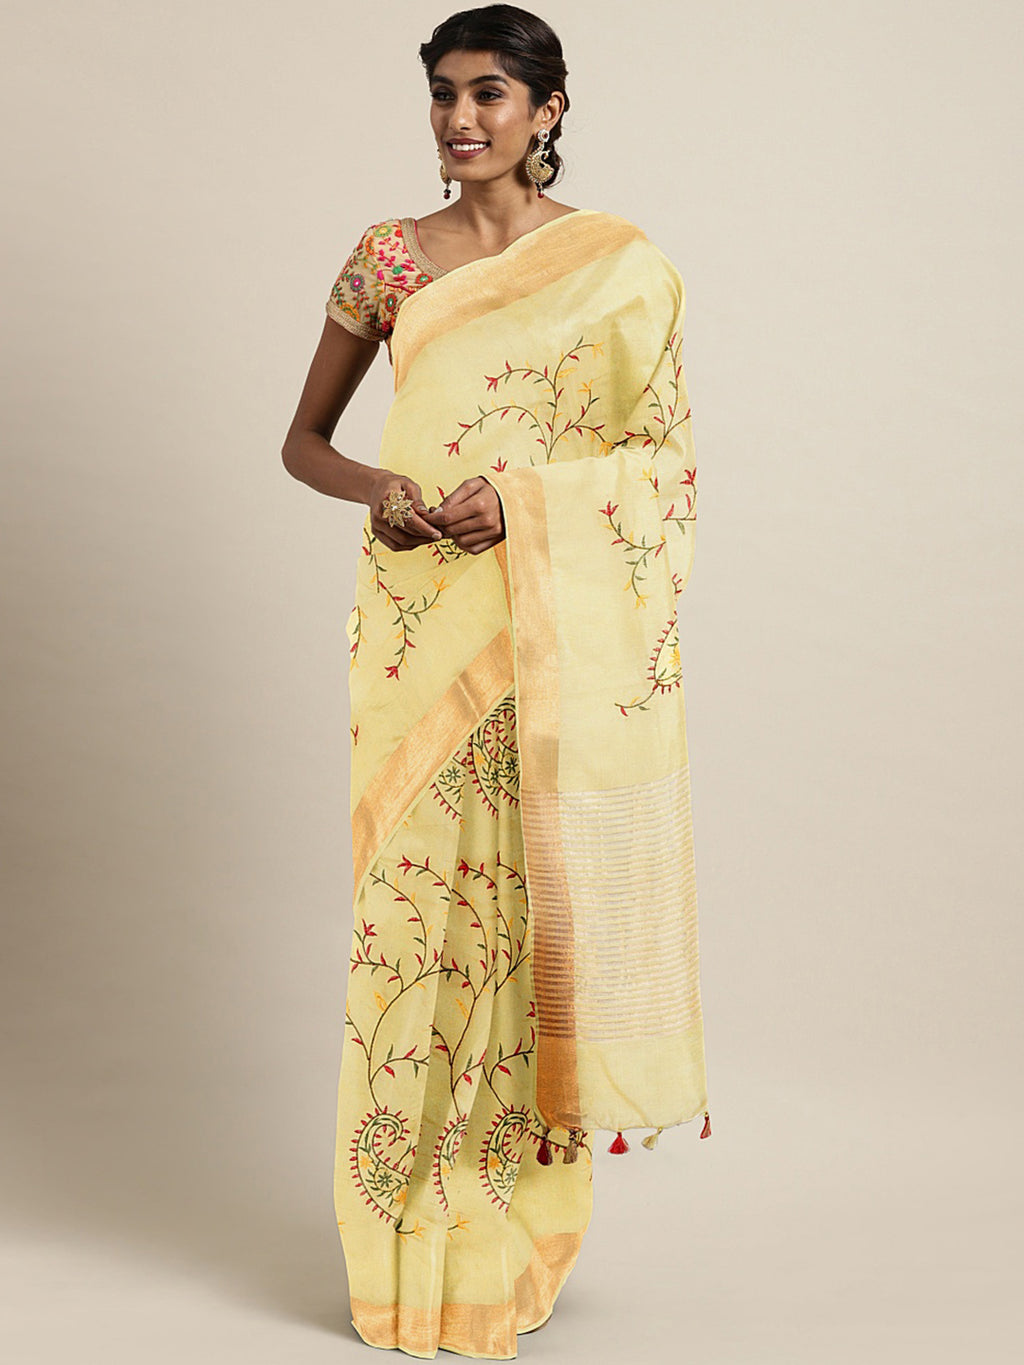 Kalakari India Kota Silk Embroidered Saree With Blouse ALBGSA0155-Saree-Kalakari India-ALBGSA0155-Geographical Indication, Hand Crafted, Heritage Prints, Linen, Natural Dyes, Pure Cotton, Sarees, Sustainable Fabrics, Woven-[Linen,Ethnic,wear,Fashionista,Handloom,Handicraft,Indigo,blockprint,block,print,Cotton,Chanderi,Blue, latest,classy,party,bollywood,trendy,summer,style,traditional,formal,elegant,unique,style,hand,block,print, dabu,booti,gift,present,glamorous,affordable,collectible,Sari,Sare